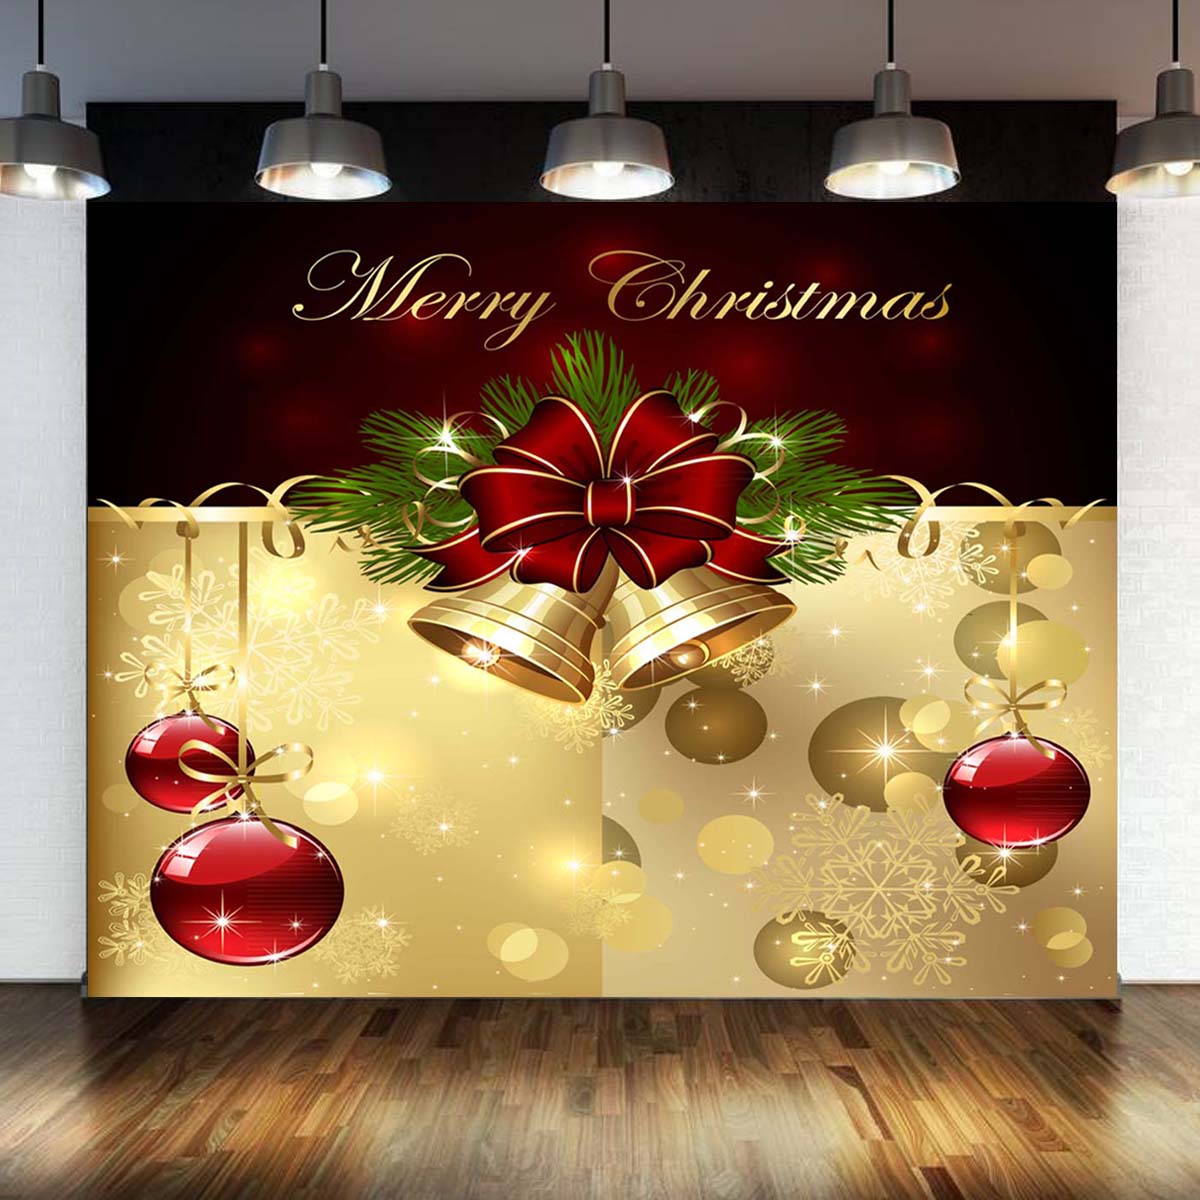 5x7FT-Vinyl-Merry-Christmas-Golded-Bell-Ring-Photography-Backdrop-Background-Studio-Prop-1574724-3